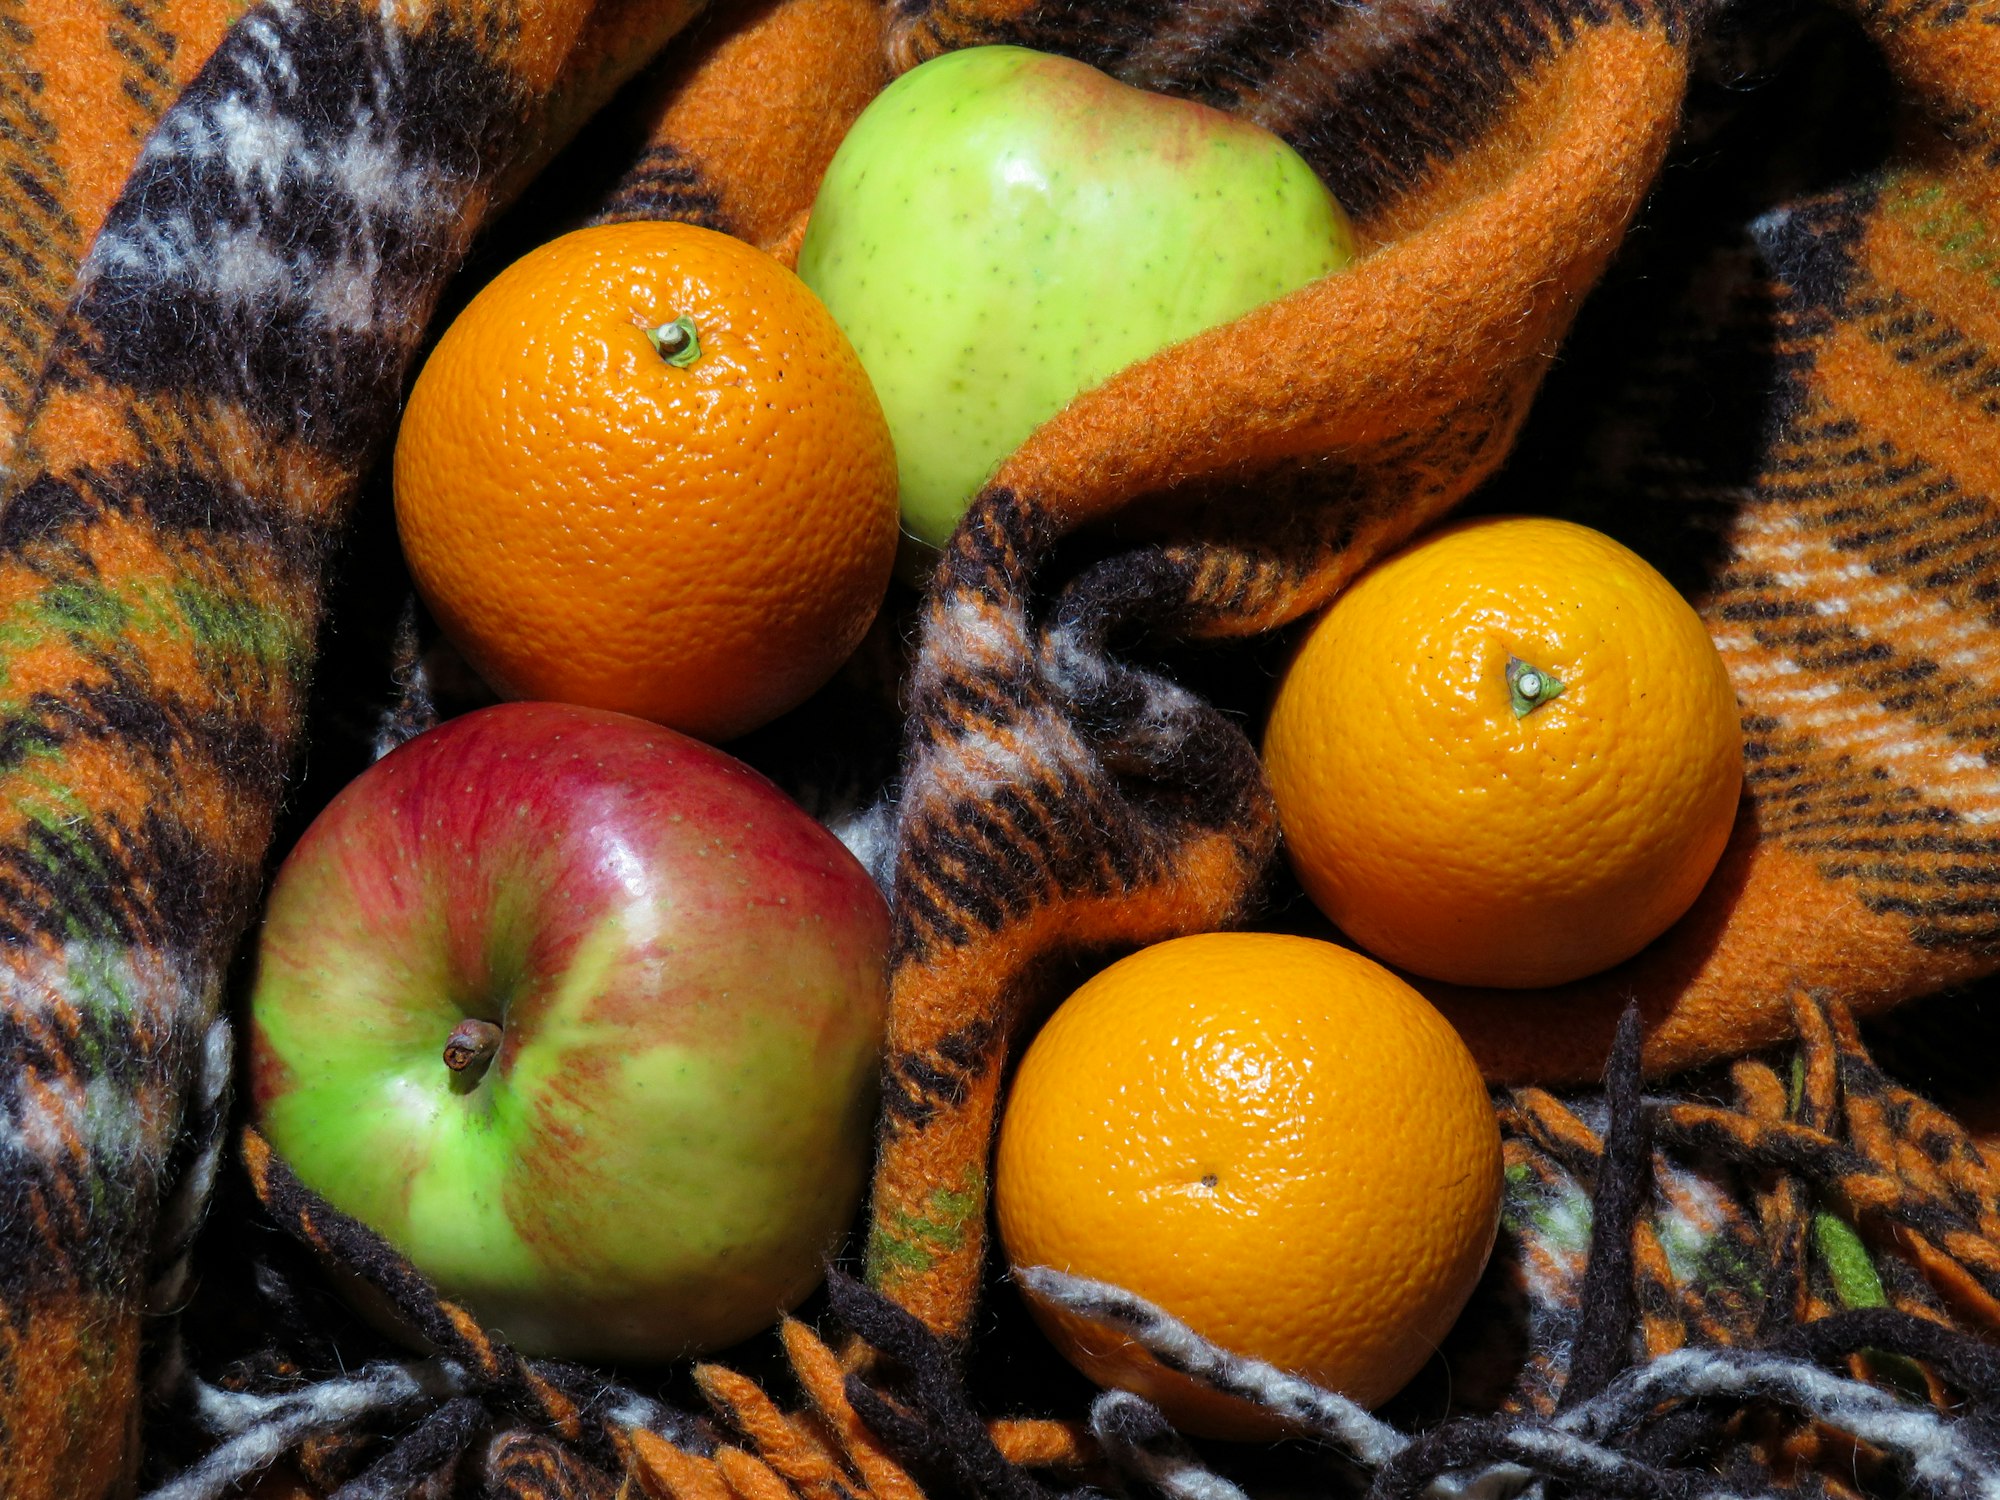 A warm plaid and tasty oranges and apples.